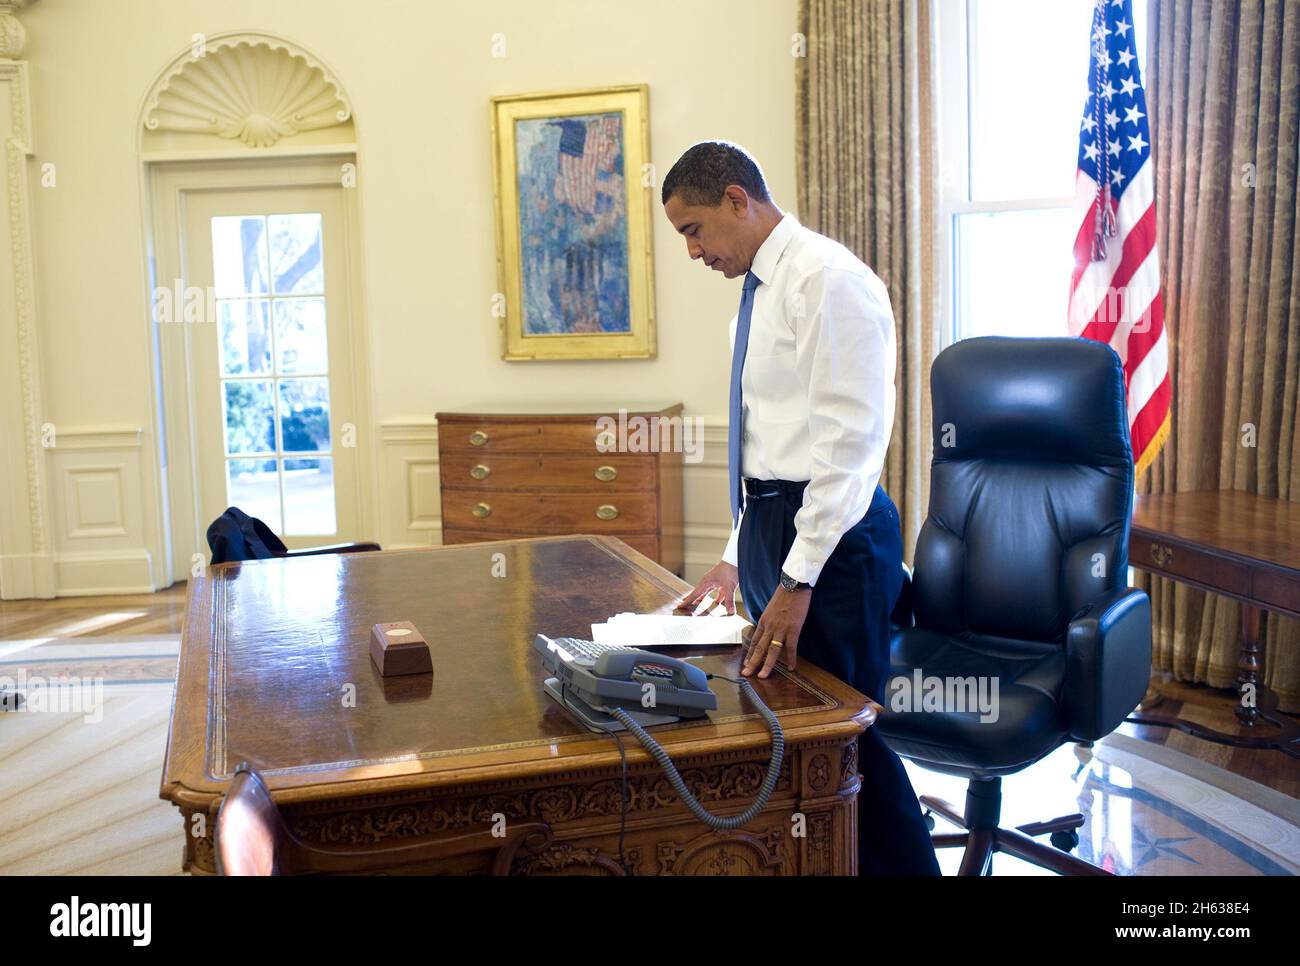 Jan. 21, 2009  - This was his first morning in the Oval Office as President of the United States. He was reading some briefing material before a meeting Stock Photo